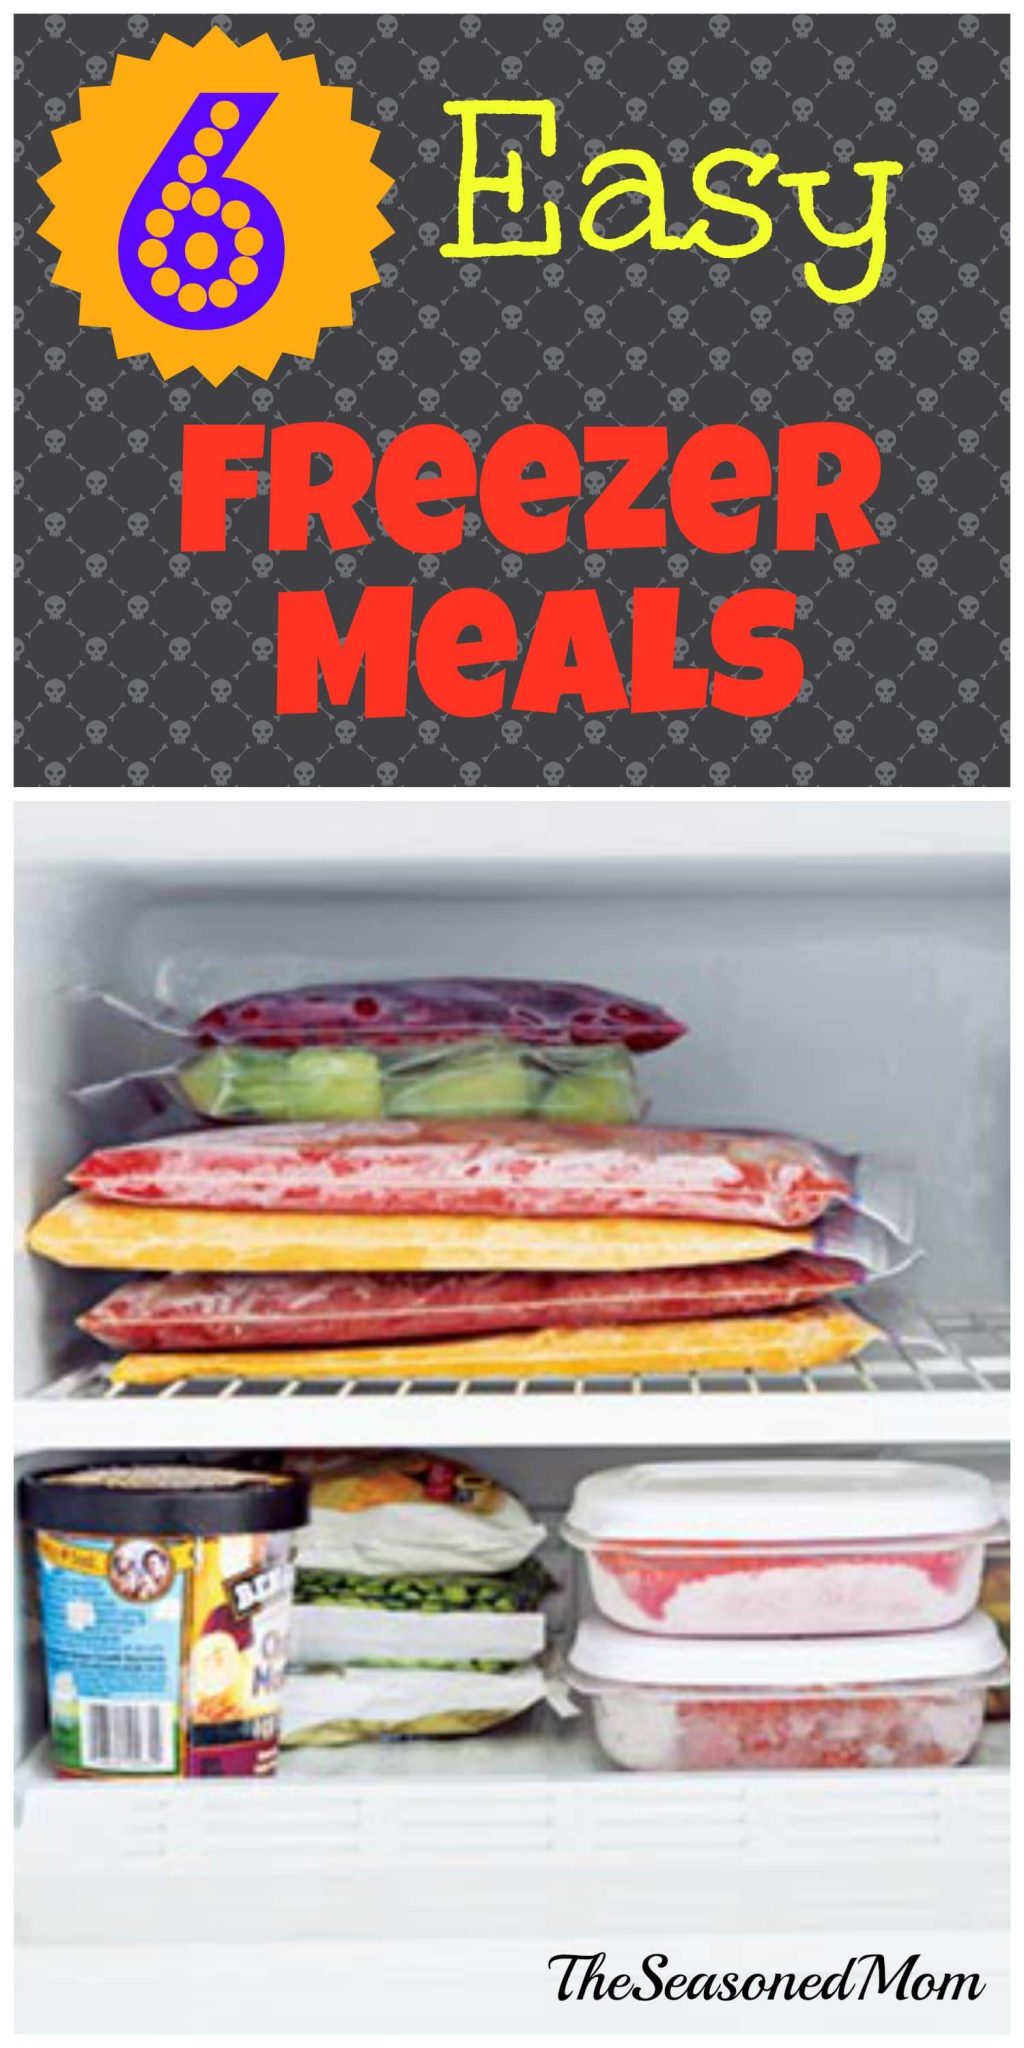 6 Healthy Slow Cooker Freezer Meals in Less Than 1 Hour! - The Seasoned Mom